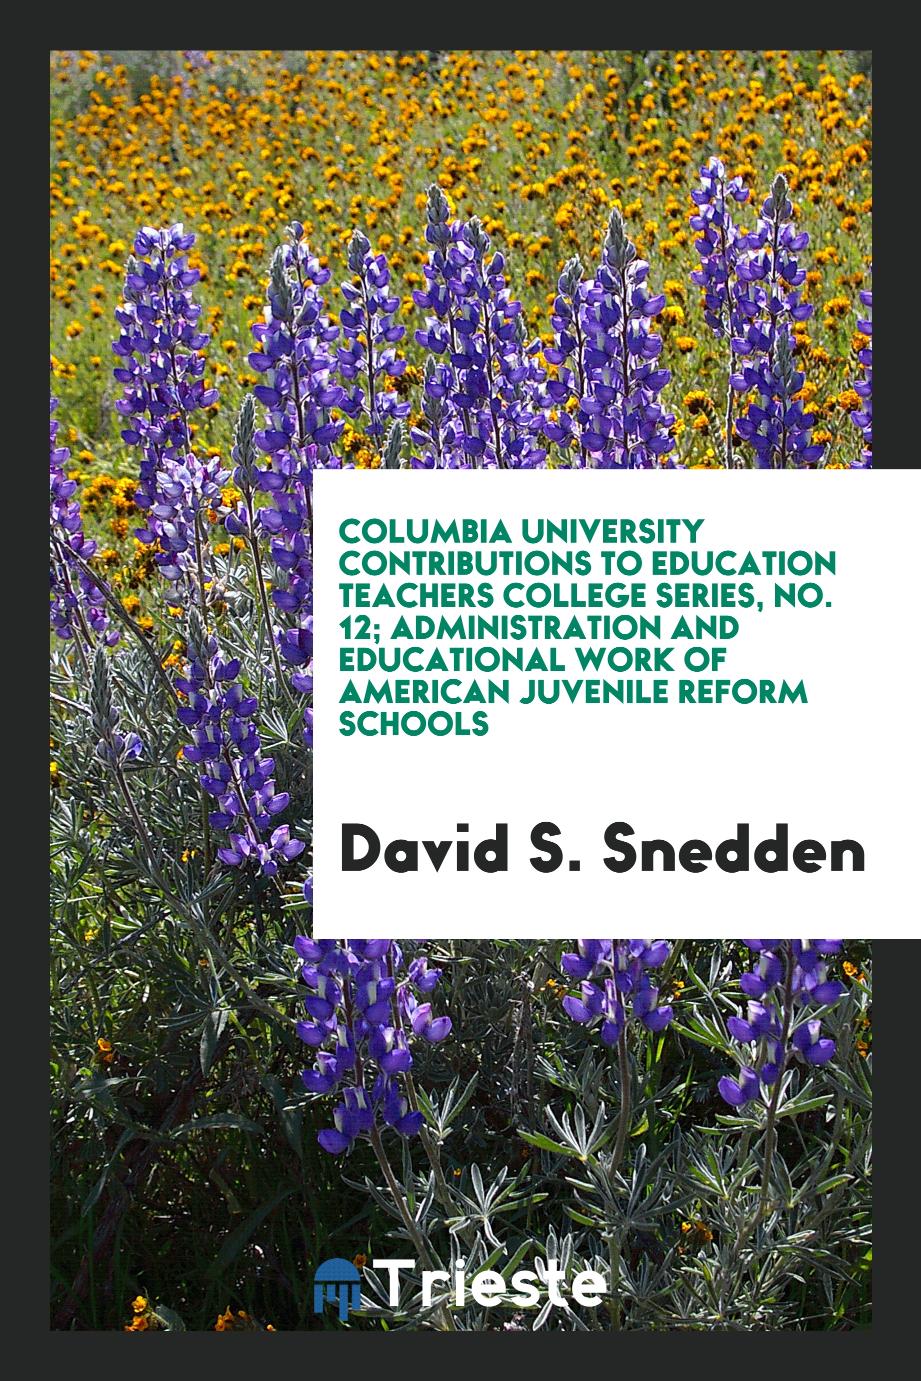 Columbia University Contributions to education teachers college series, No. 12; Administration and educational work of American juvenile reform schools